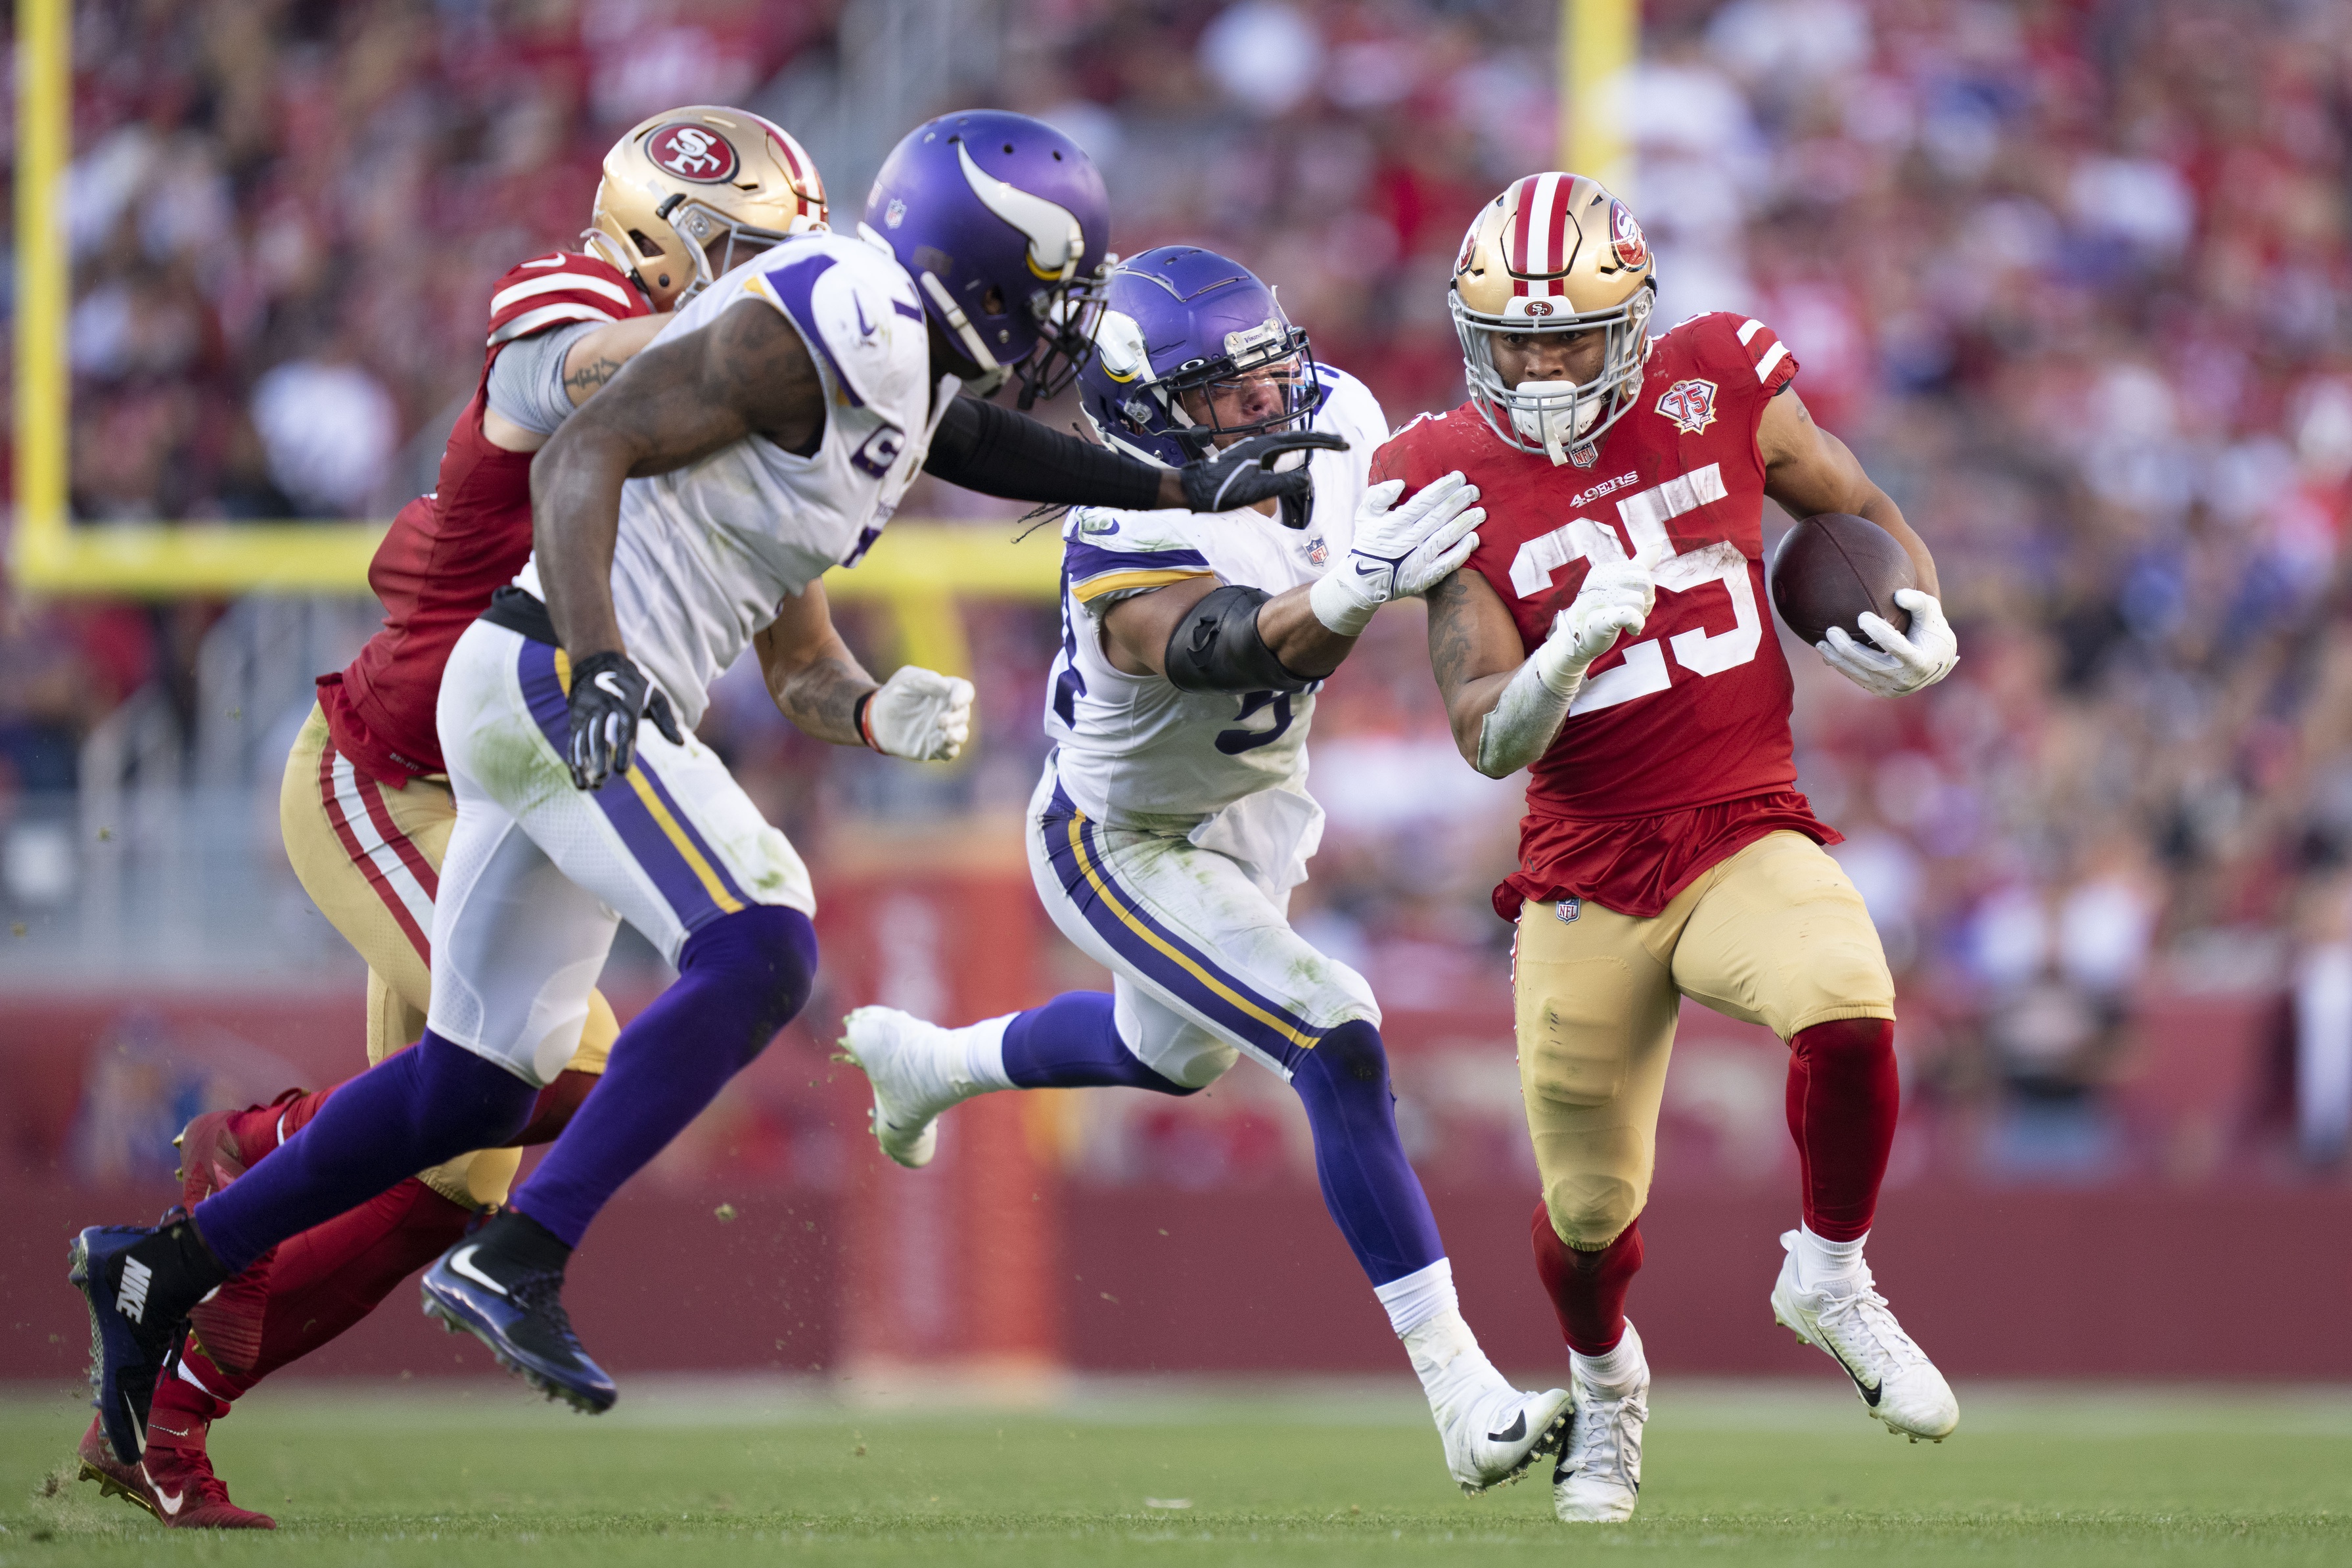 Vikings-49ers joint practices: storylines, individual matchups to track